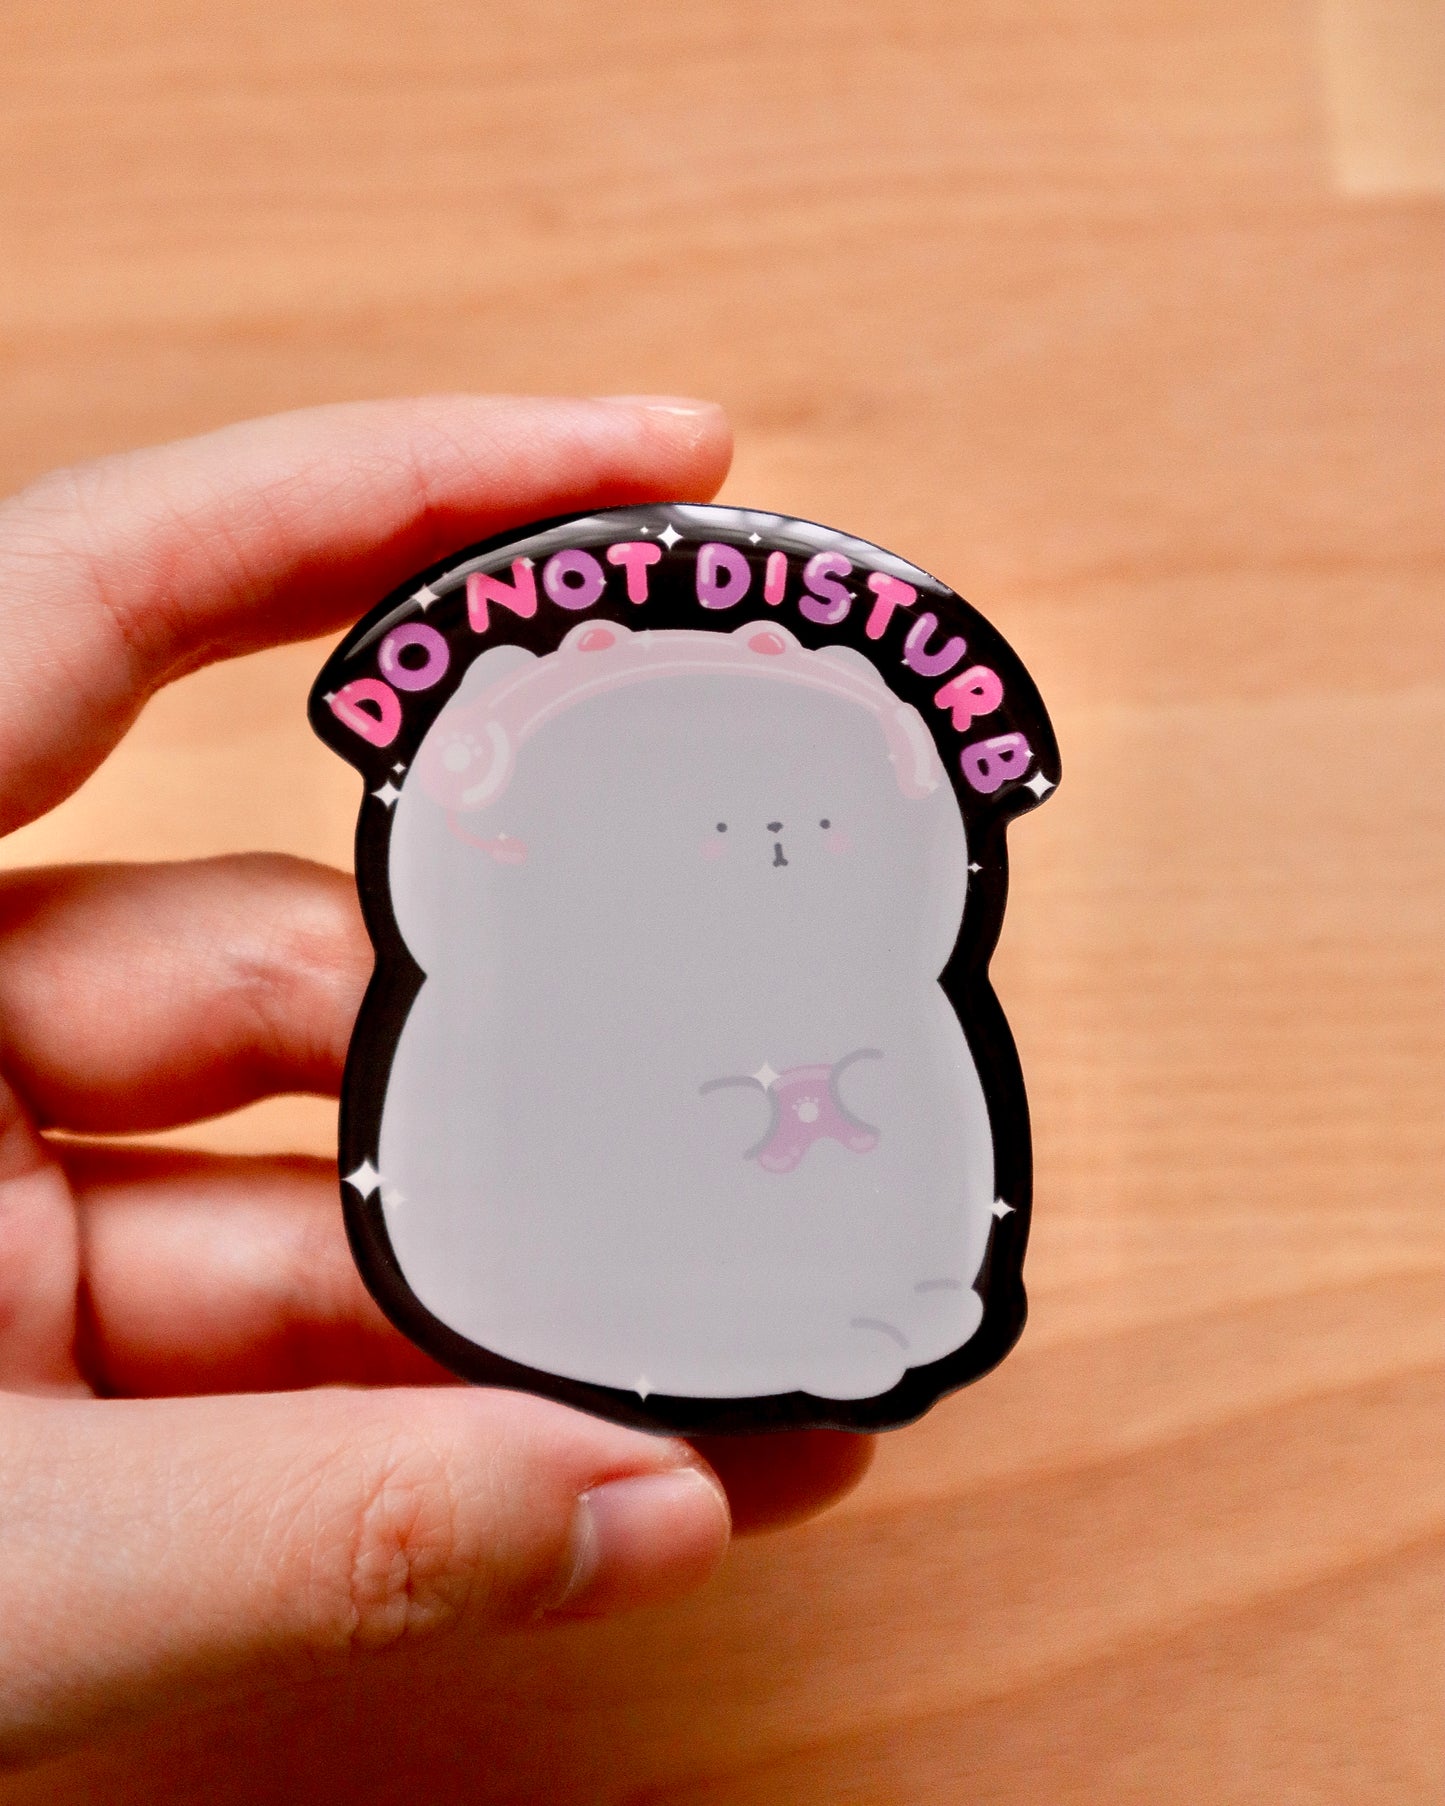 Game Pippin Do Not Disturb Acrylic Pin